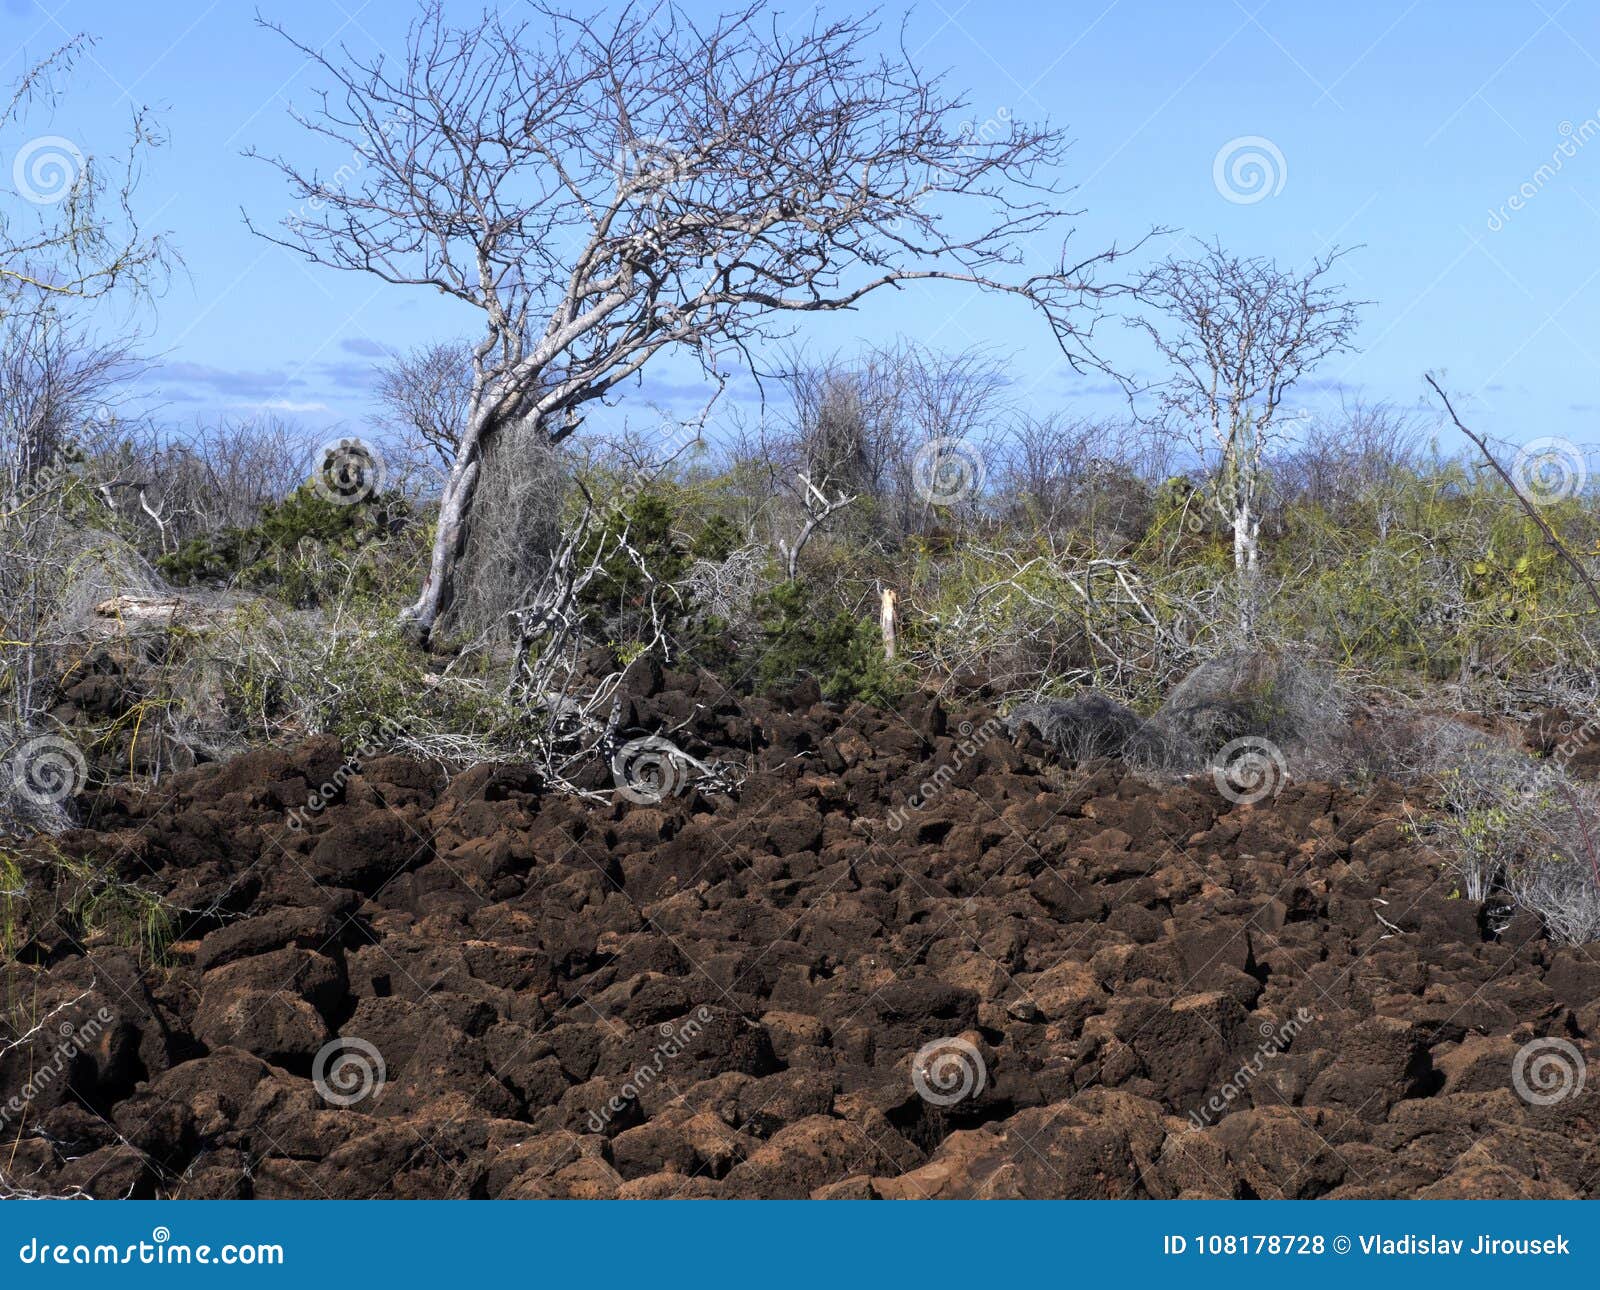 the landscape on the baltra island is made up of lava stones, galapagos, ecuador